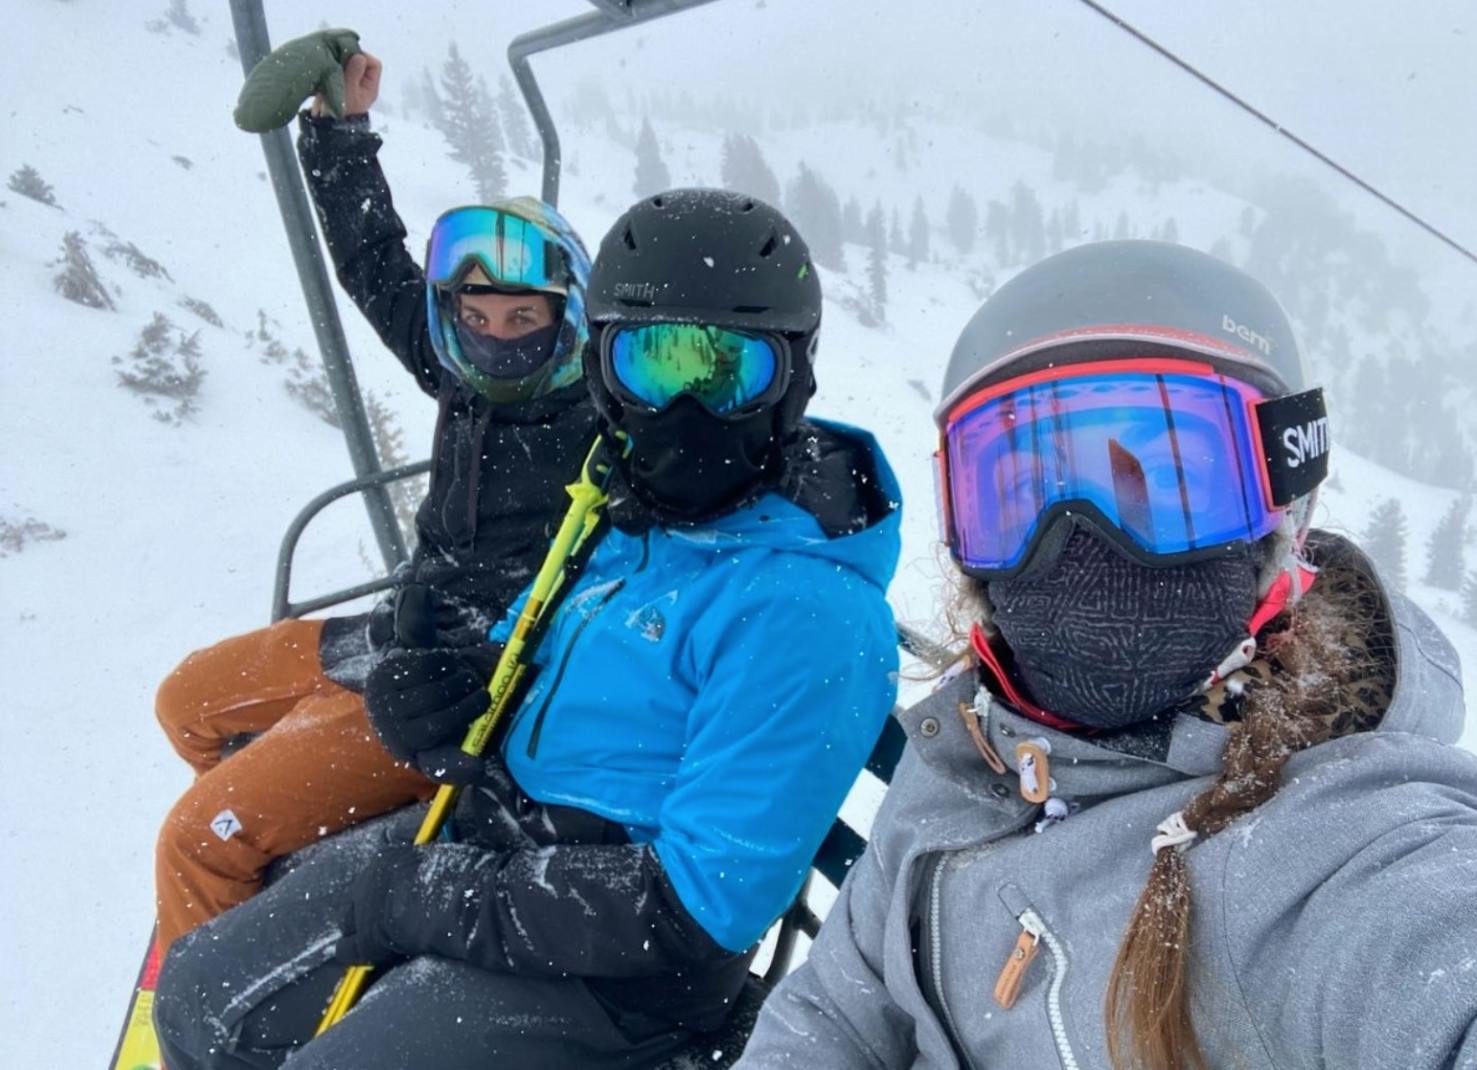 Three people sitting on a chairlift at a ski resort.